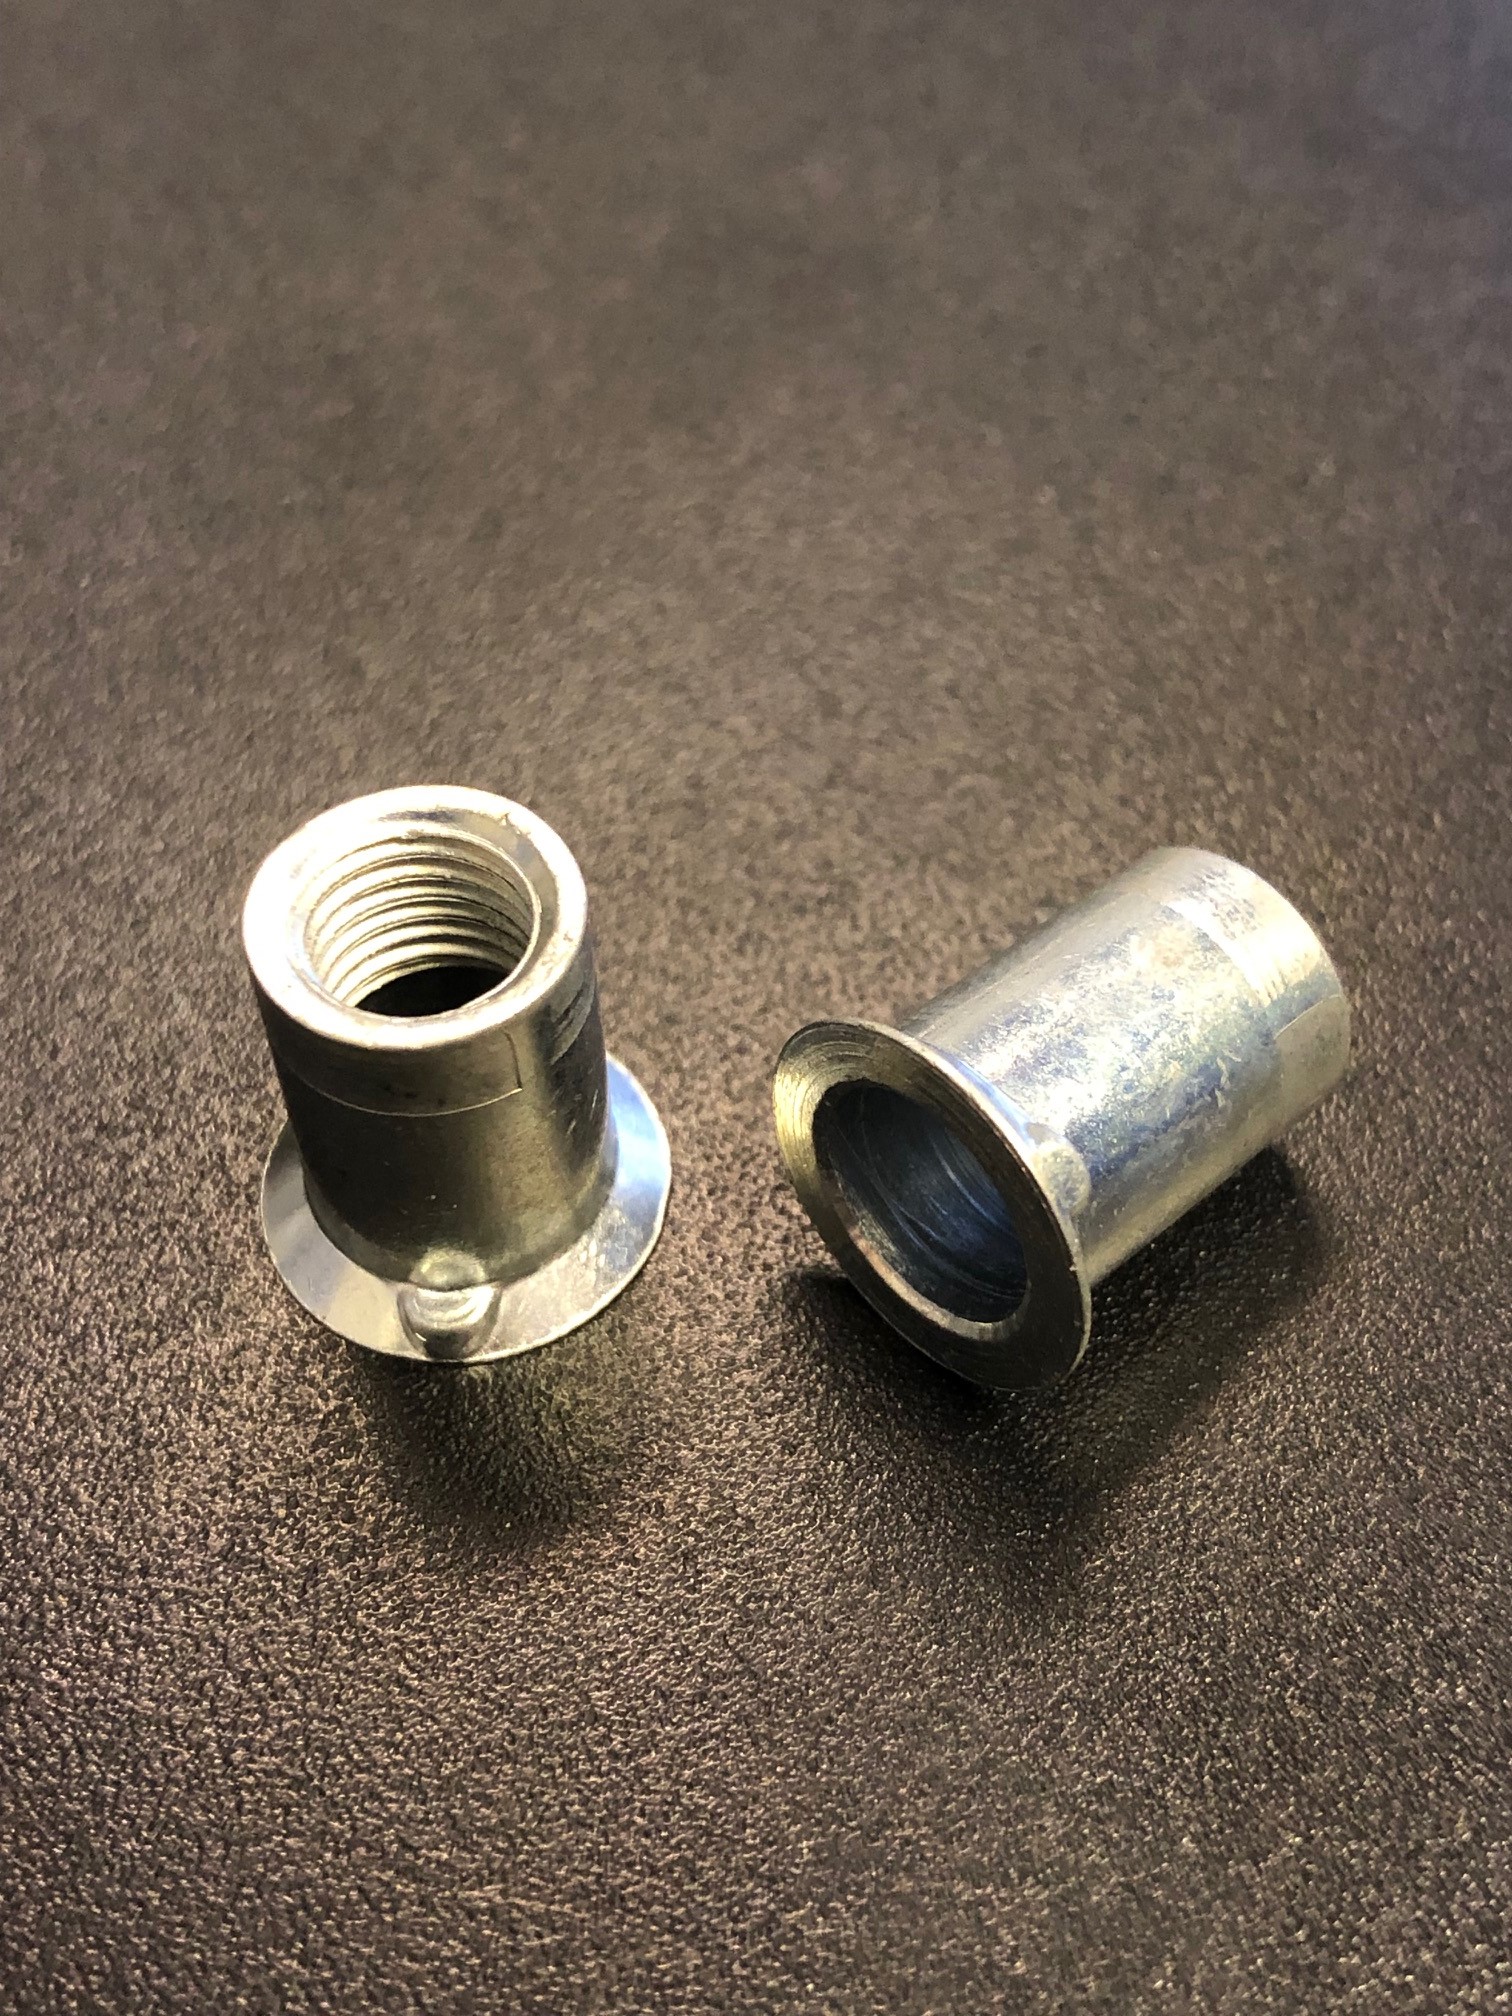 Part # 2R1502  Manufacturer BOLLHOFF  Product Type Rivet Nuts